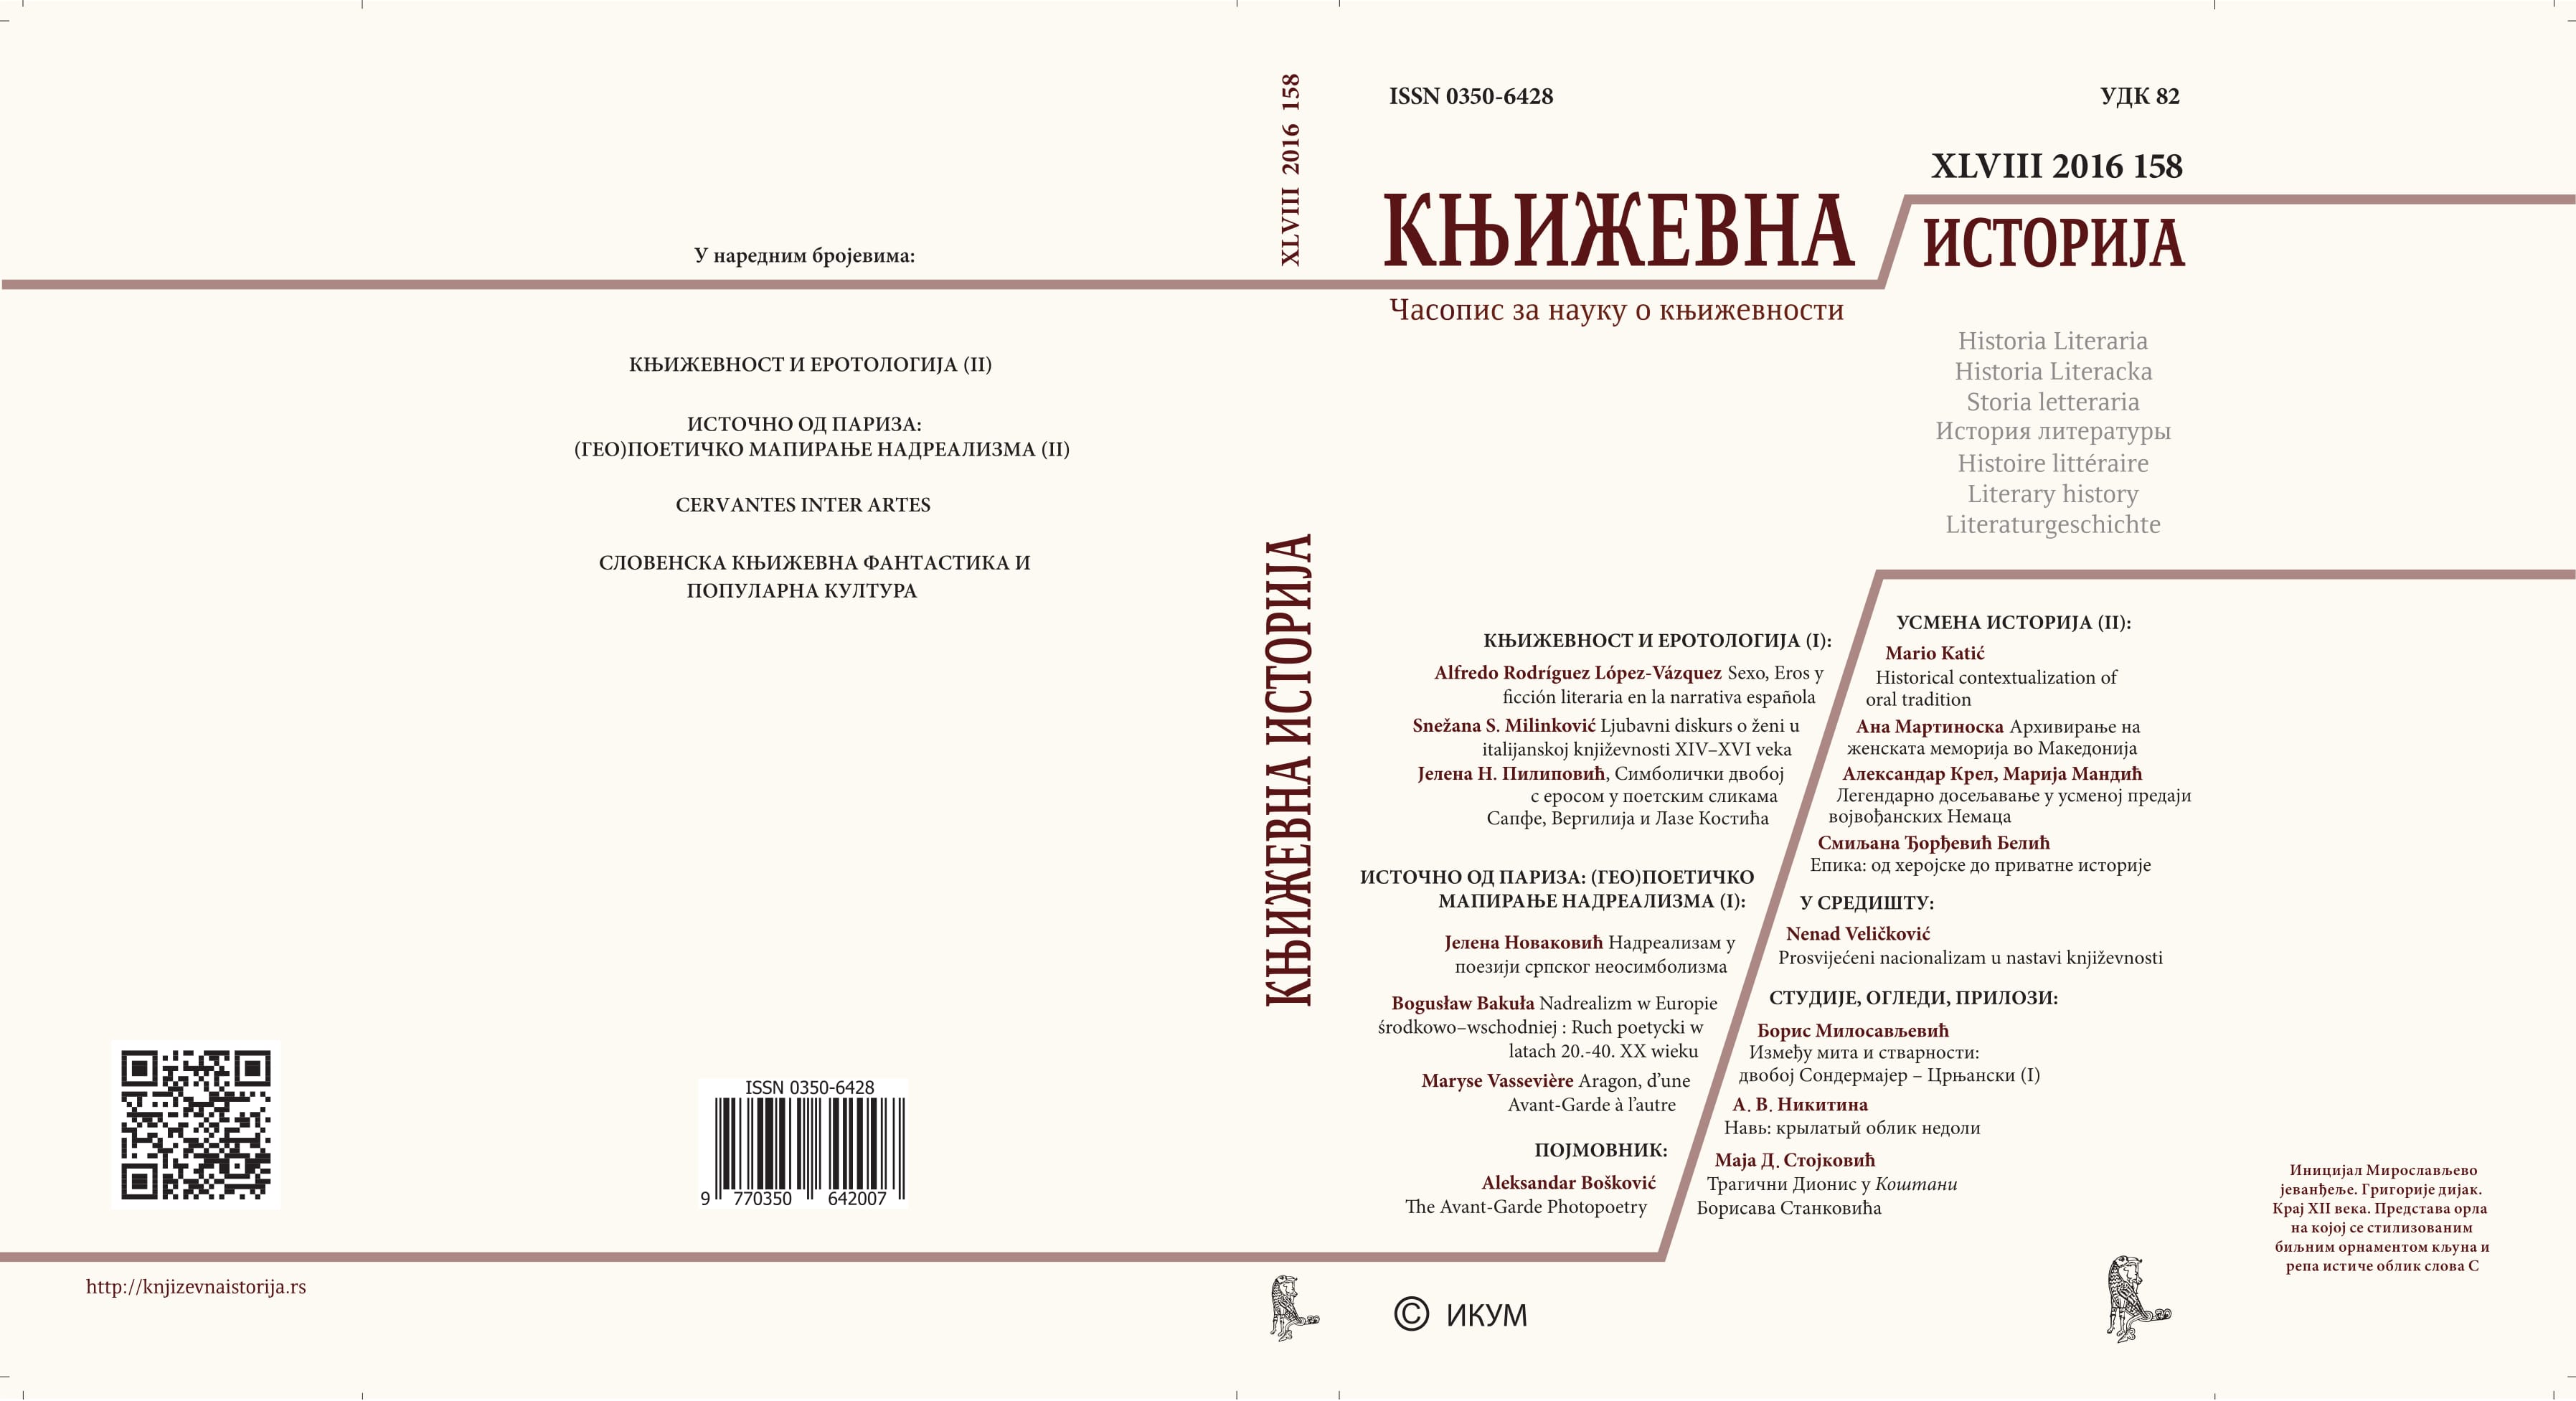 Surrealist poetry traces in Serbian Neo-symbolism Cover Image